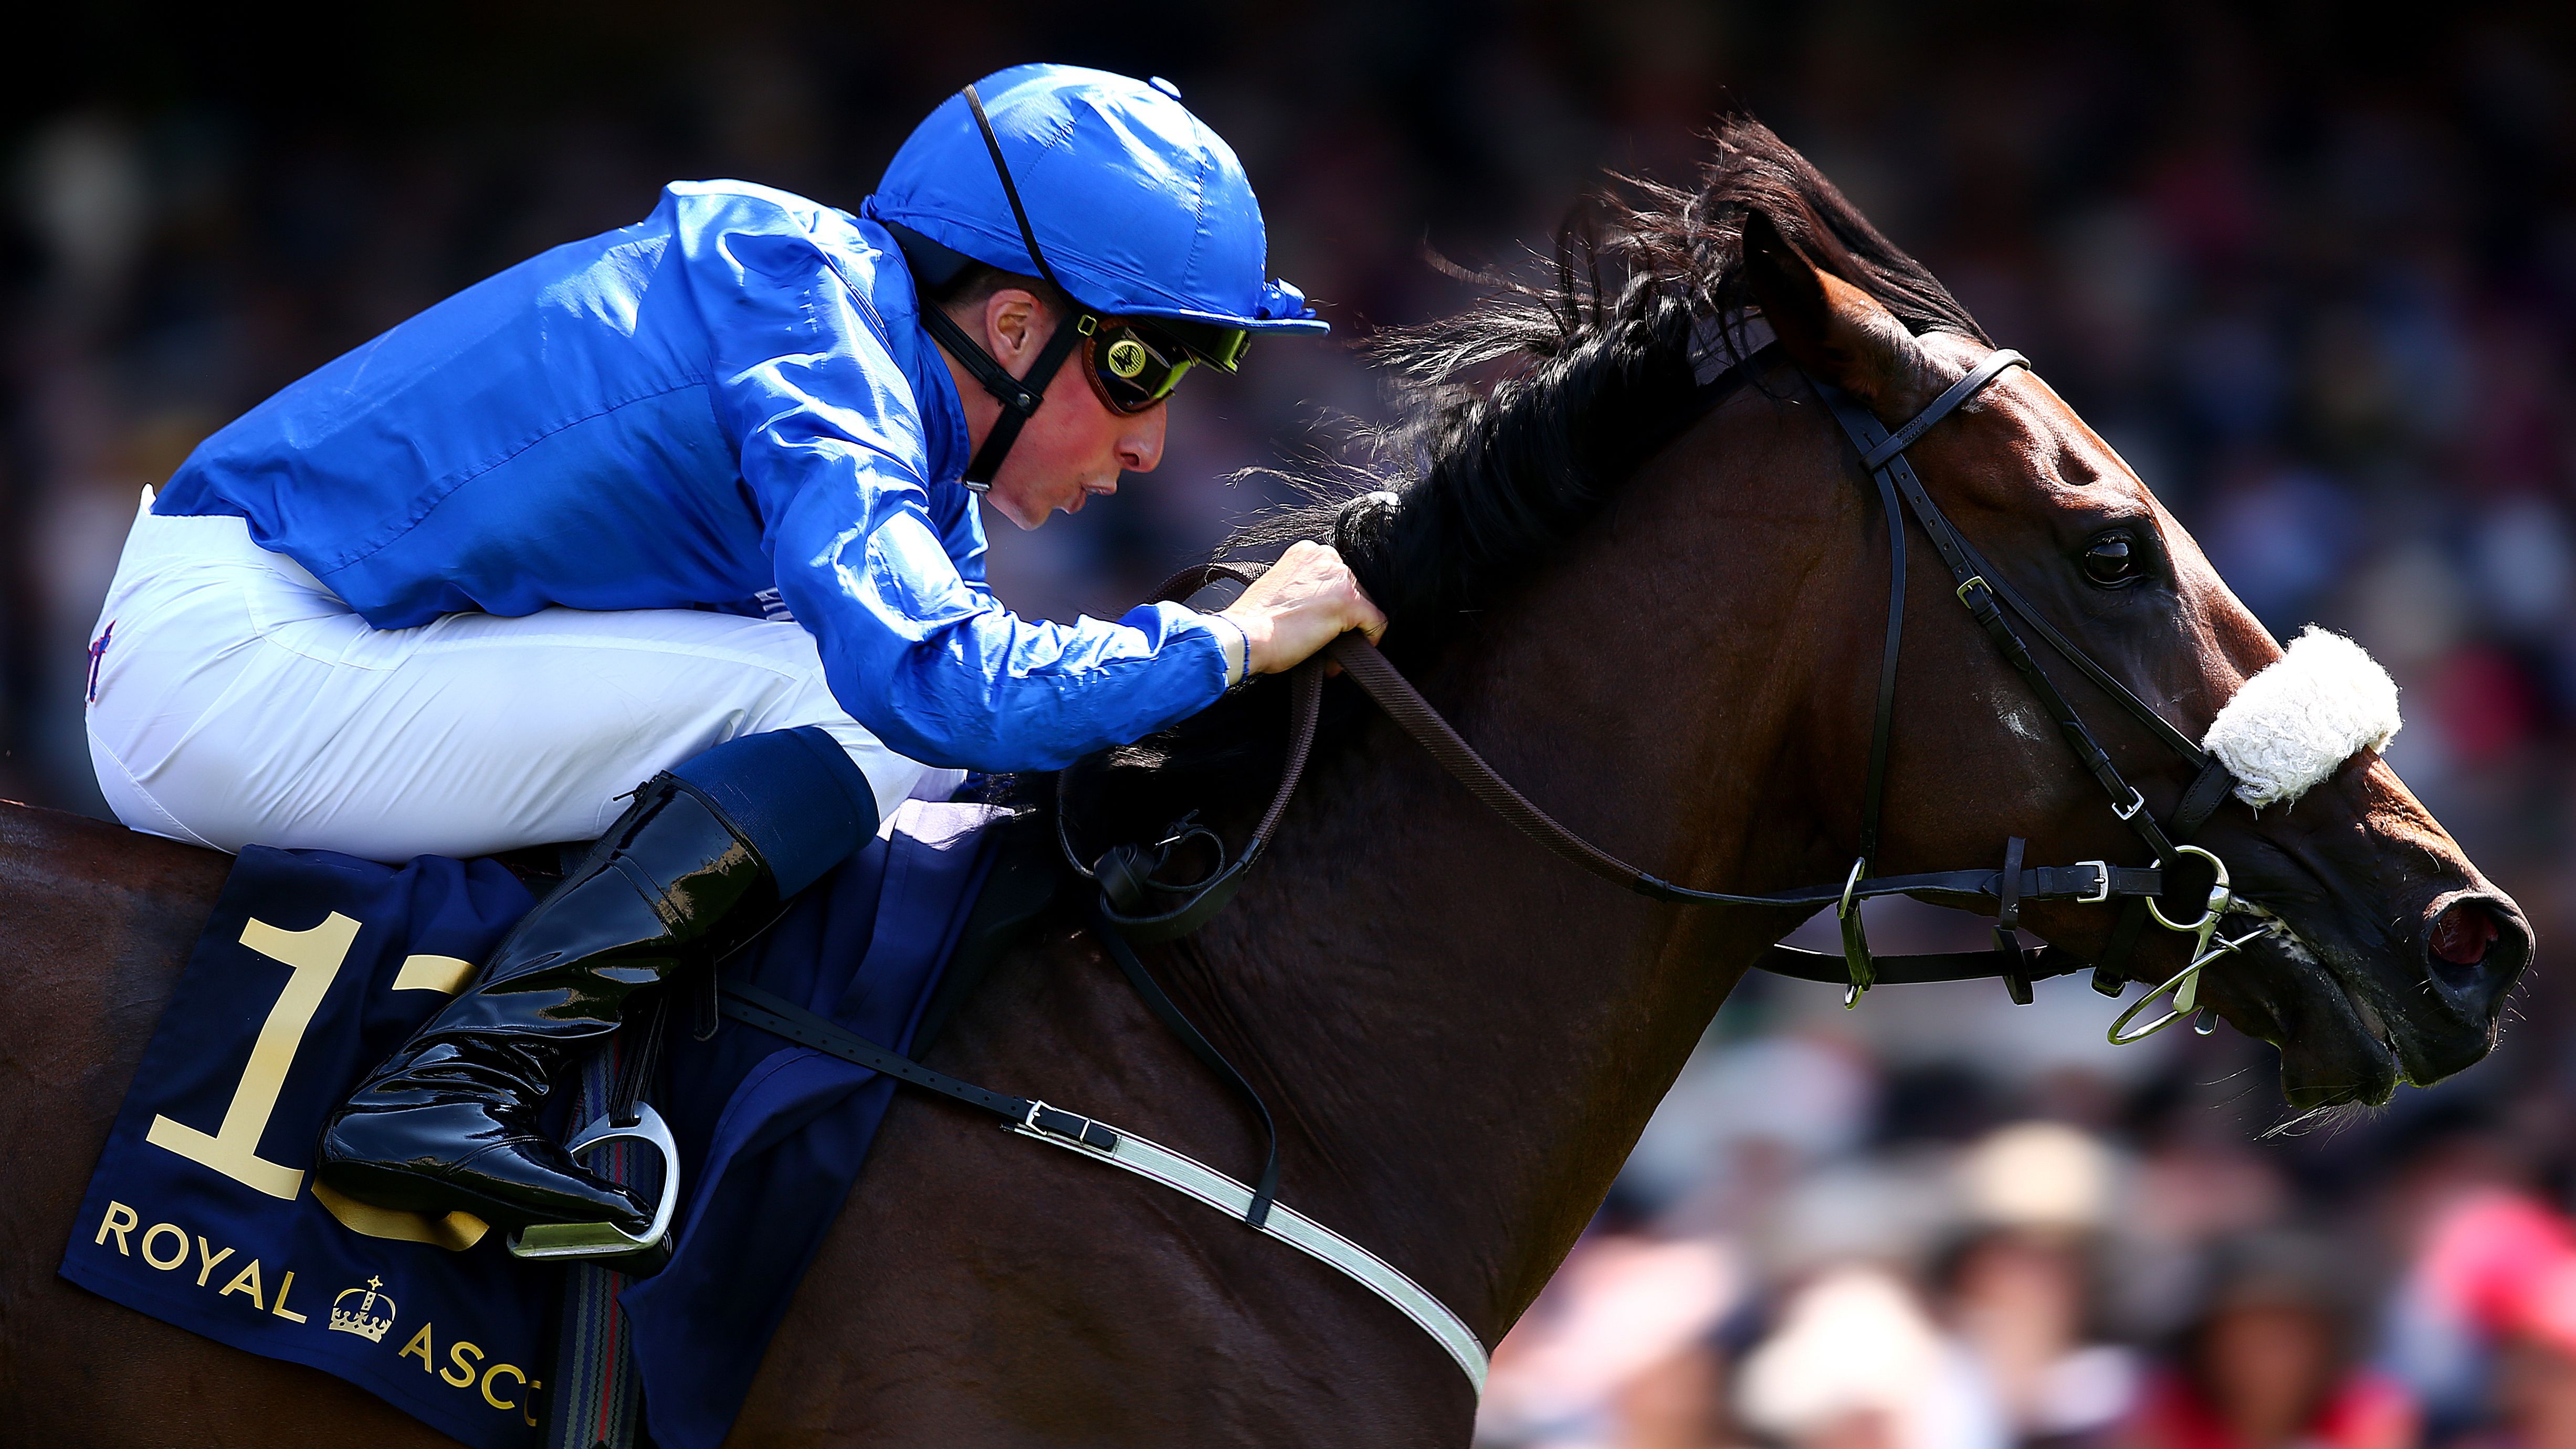 Godolphin's Ribchester won the Queen Anne Stakes at Royal Ascot in 2017.